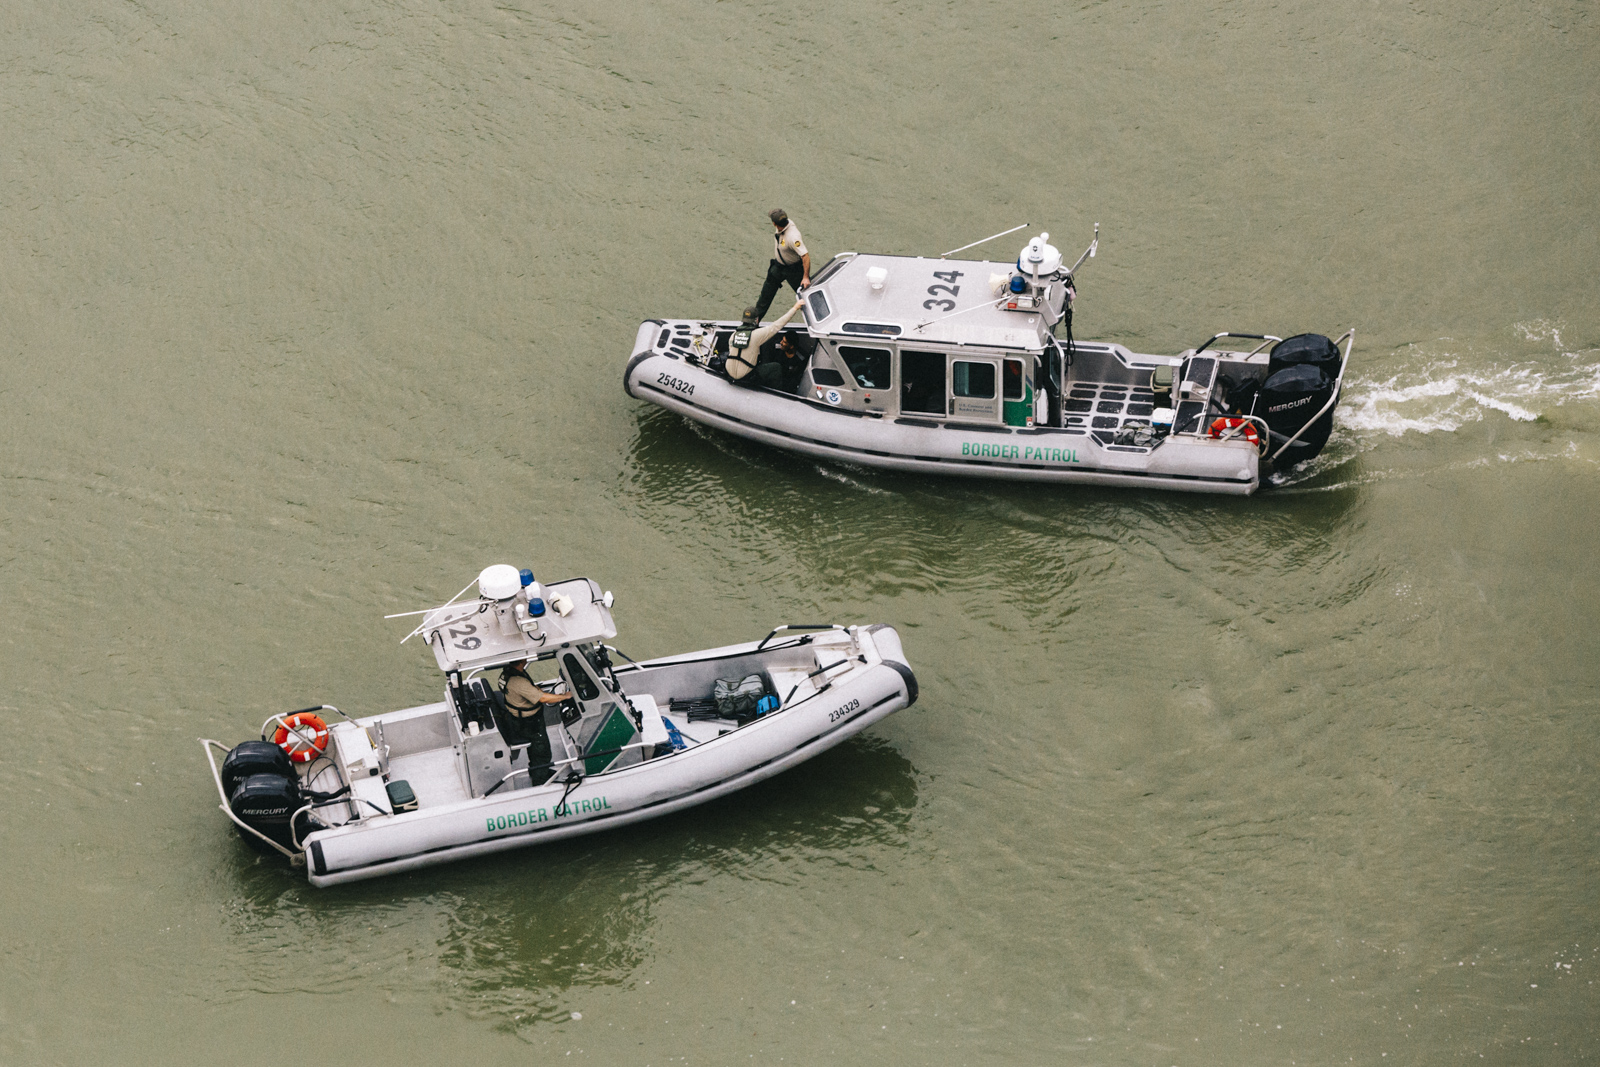 U.S. Customs and Border Protection in Southeast Texas